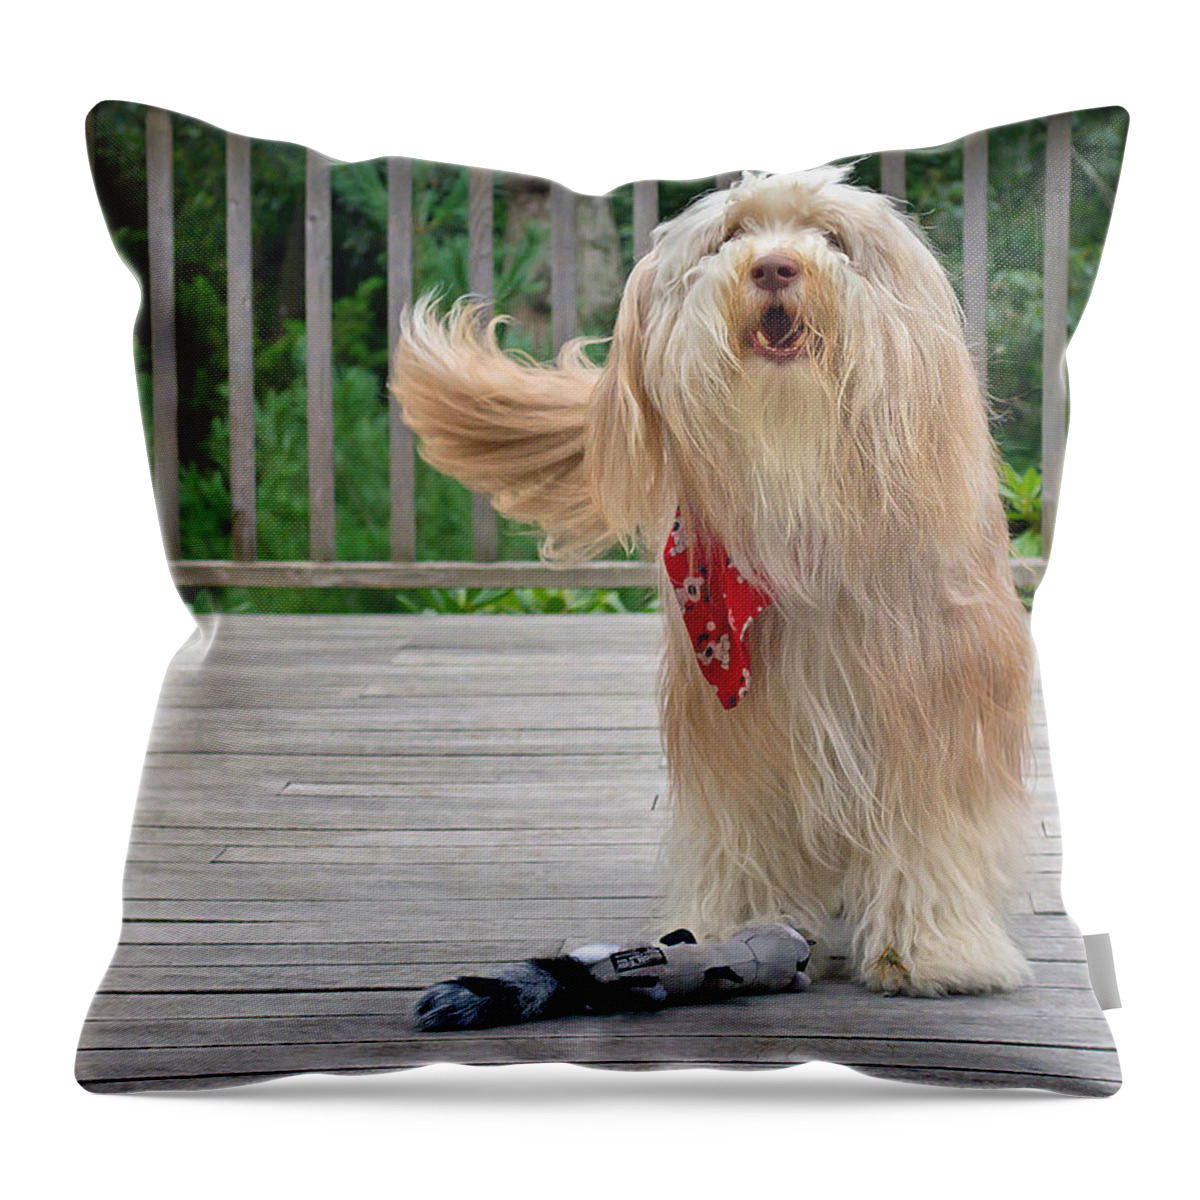 Dog Throw Pillow featuring the photograph Play With Me by Keith Armstrong